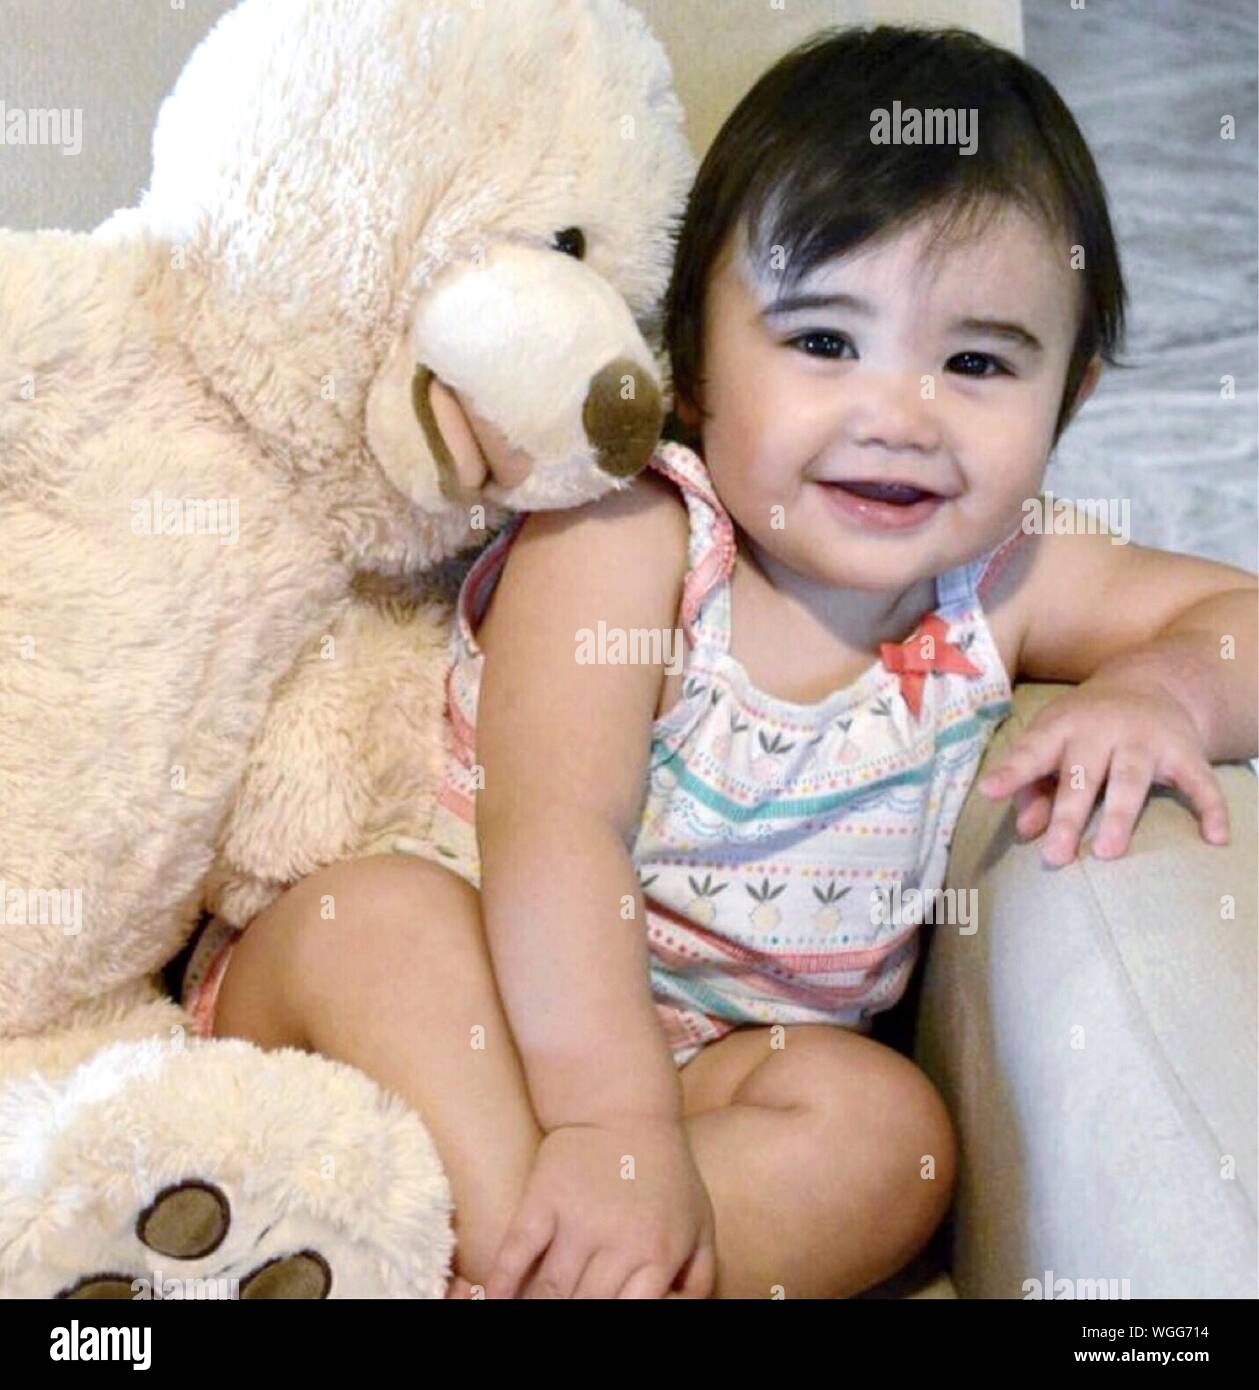 cute baby with teddy